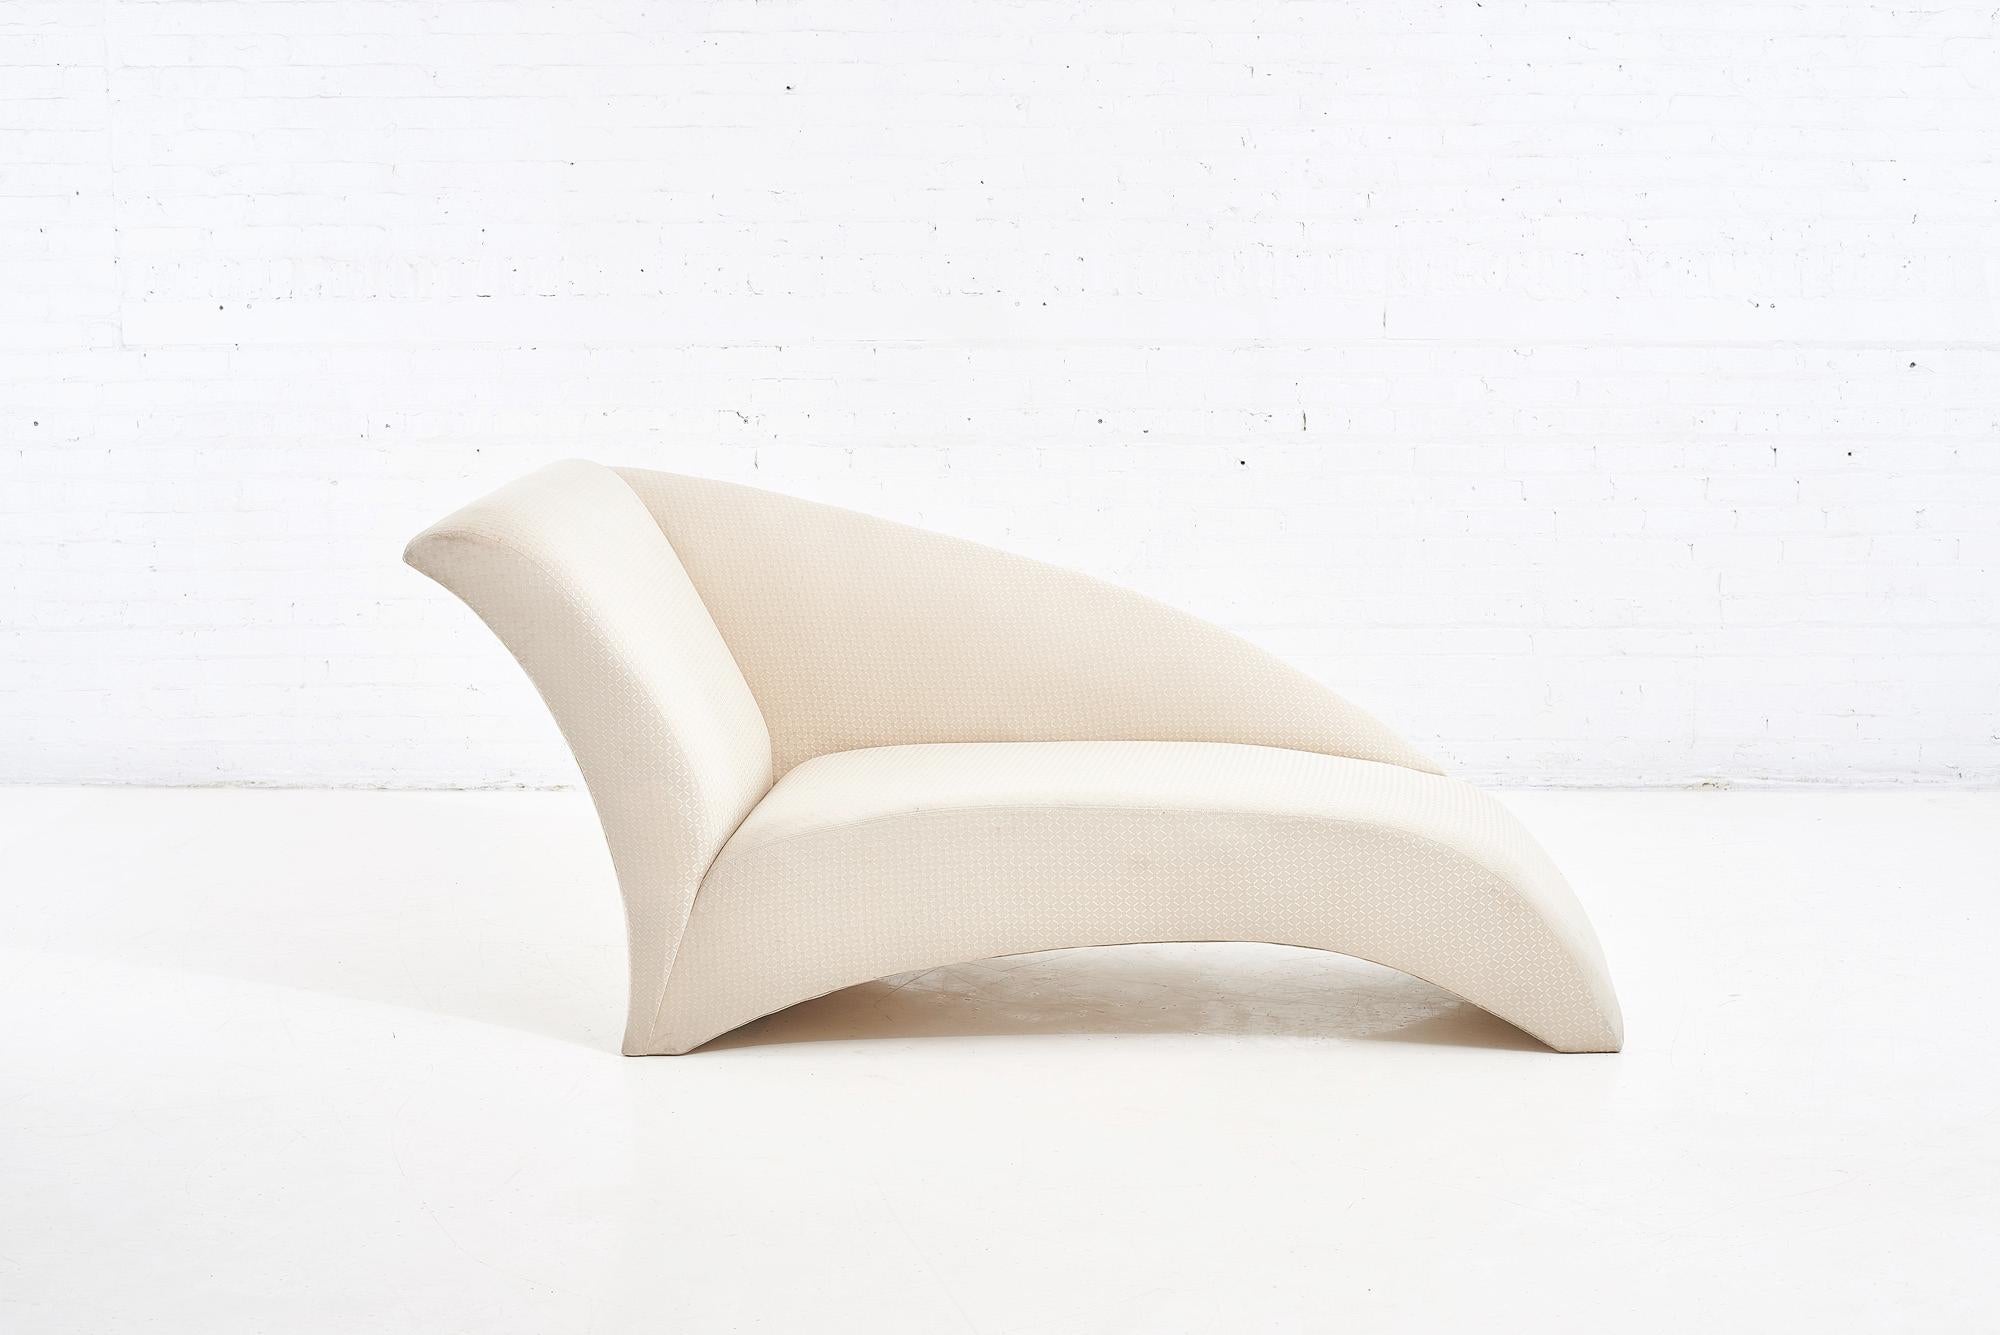 Directional chaise lounge by Vladimir Kagan.  Newly reupholstered in white boucle.